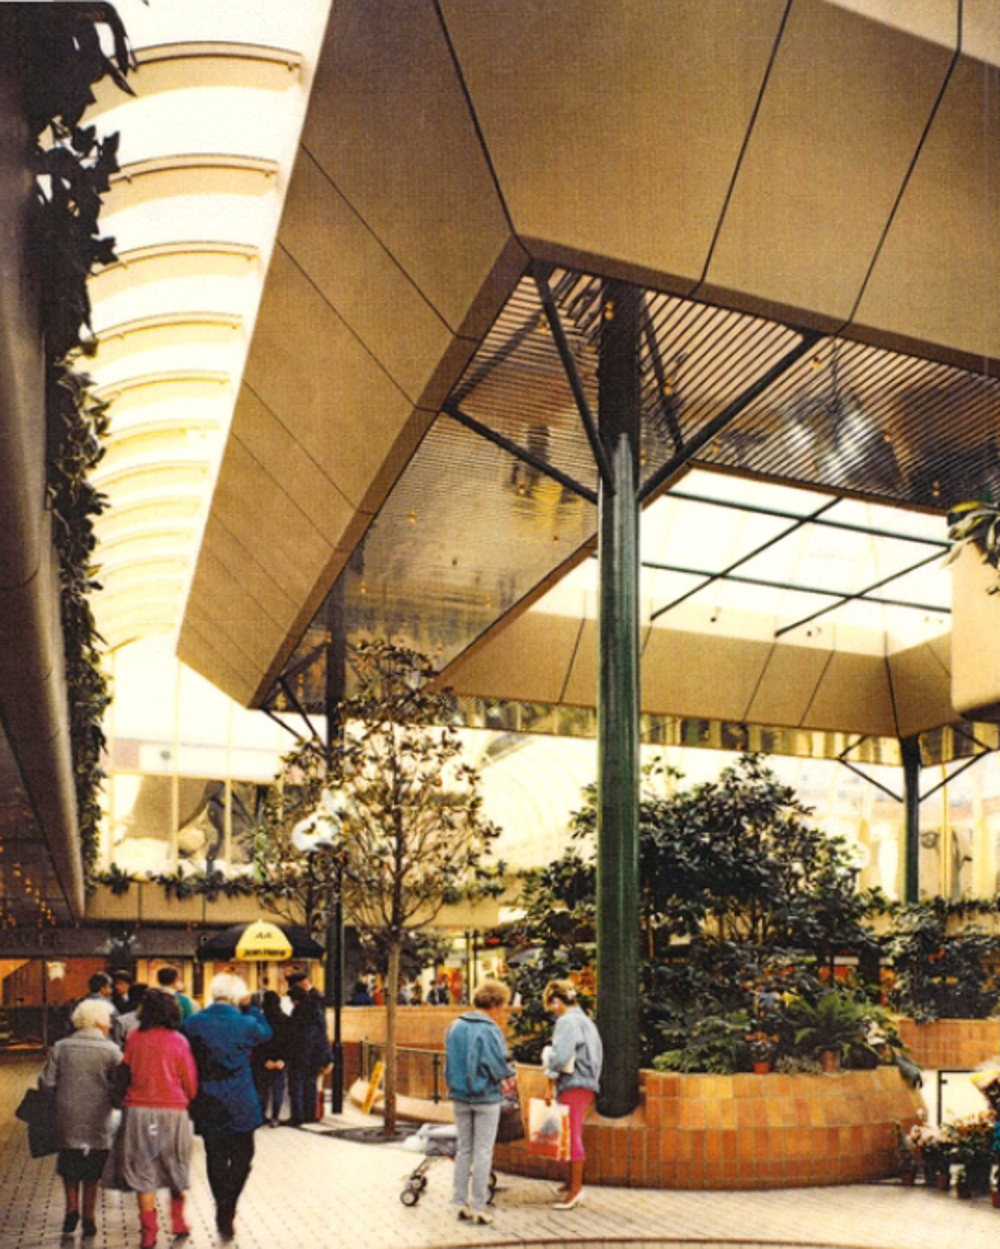 Indoor shopping centre